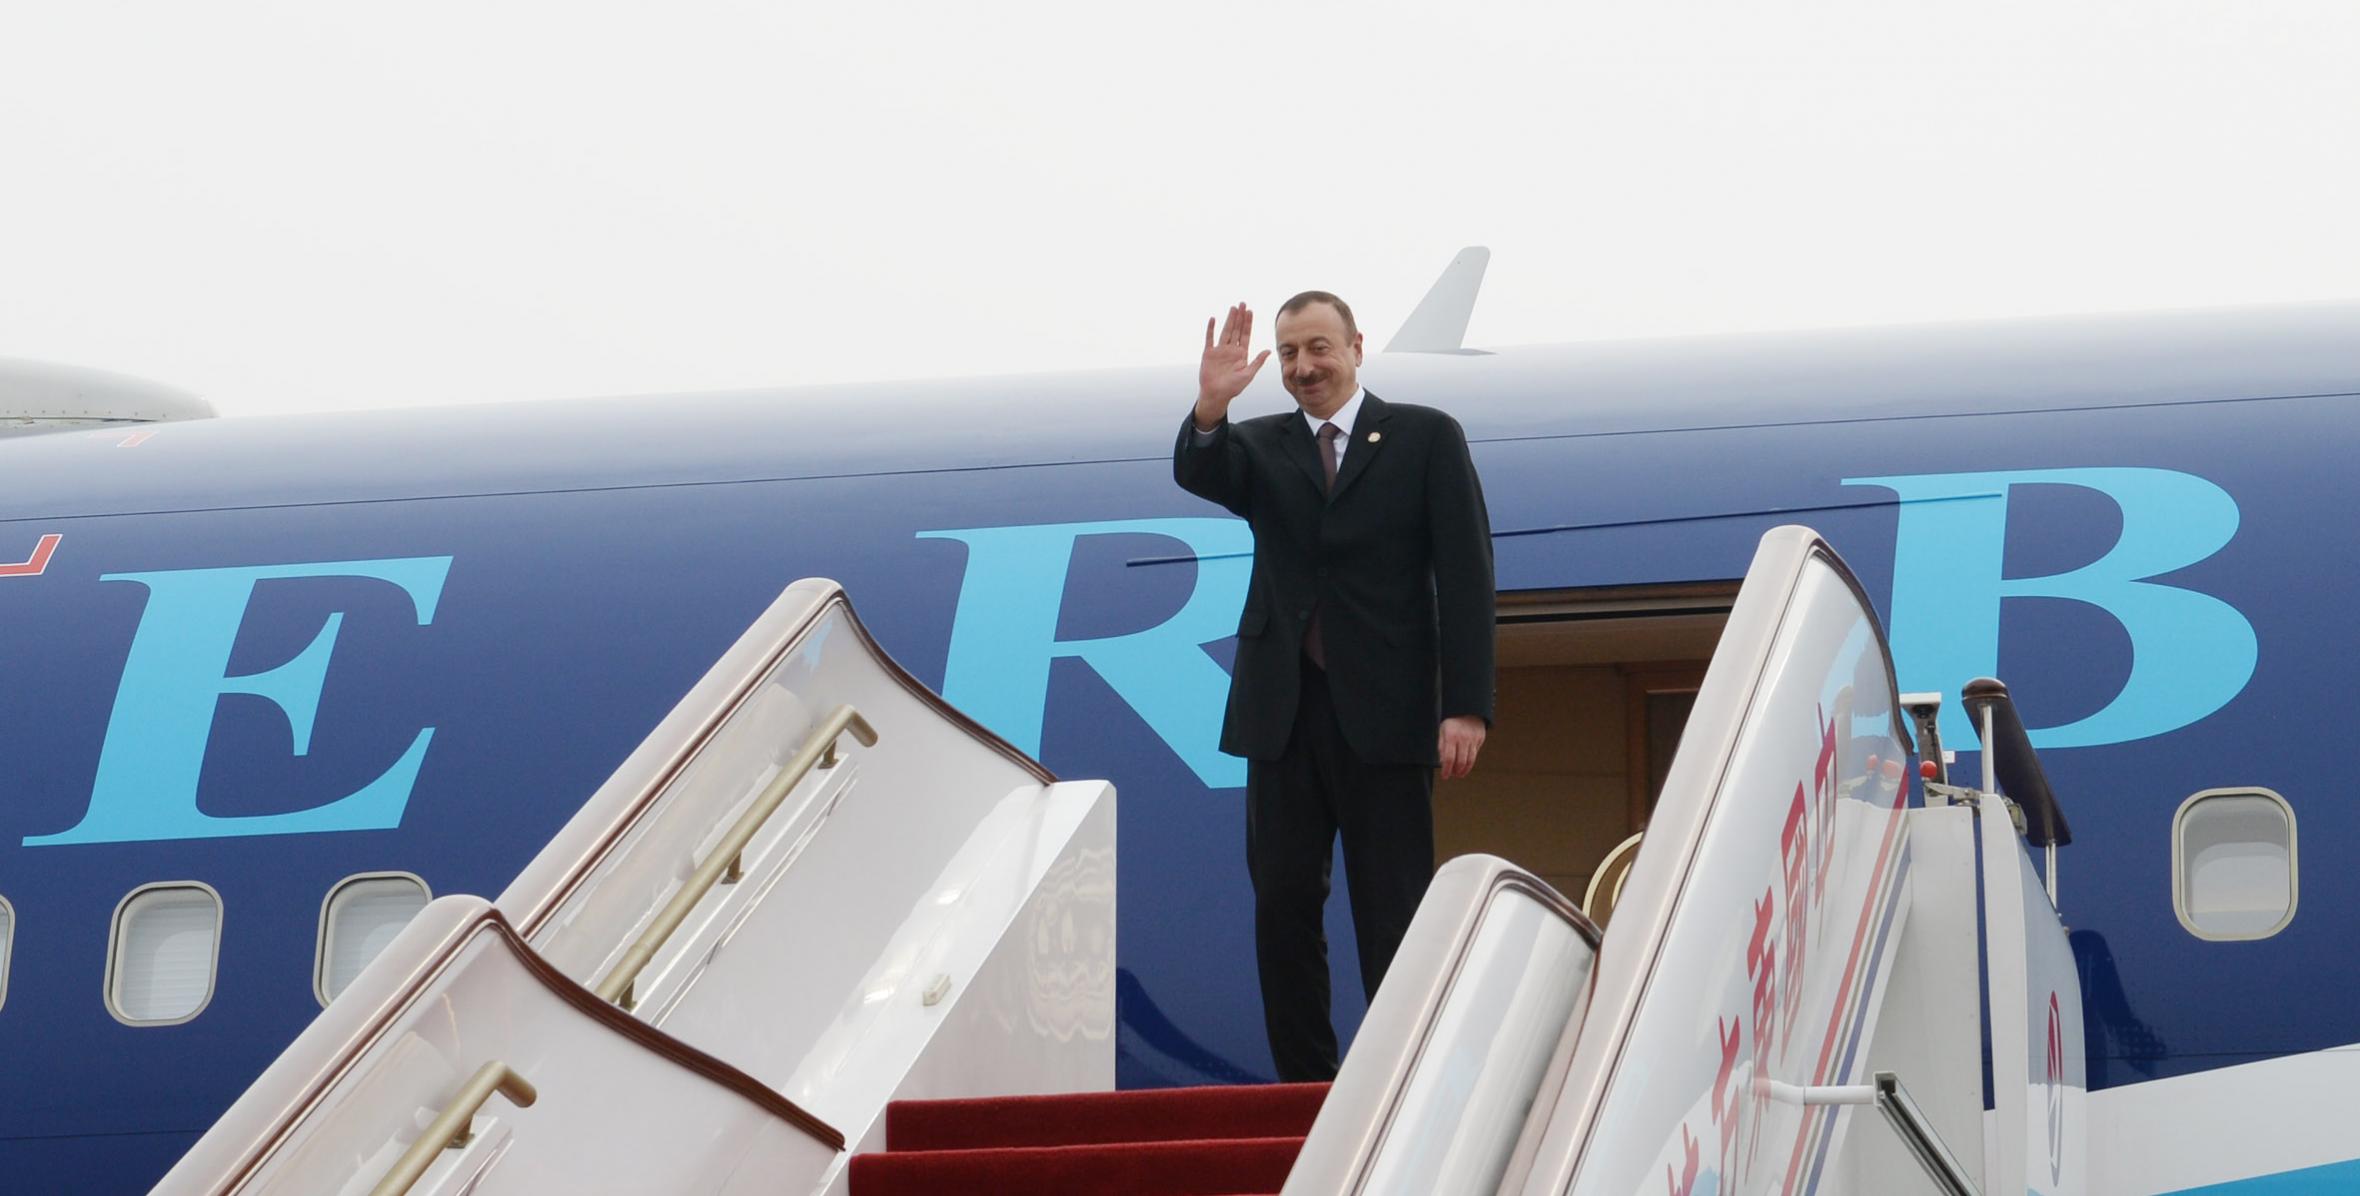 Ilham Aliyev’s working visit to China ended